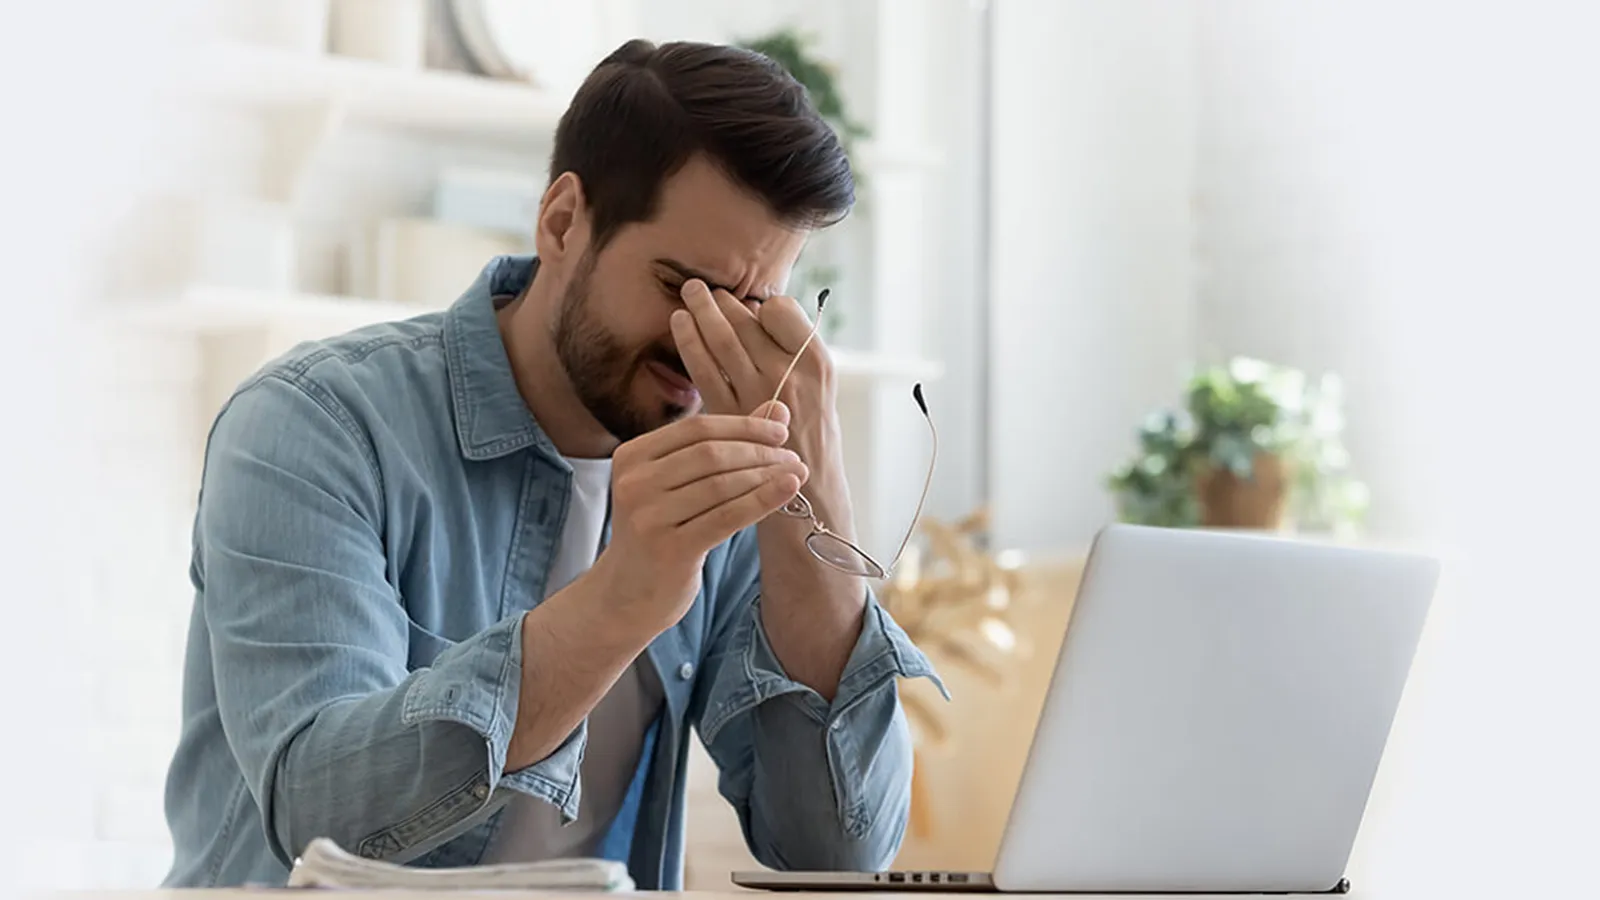 How to prevent eye strain when using a computer?